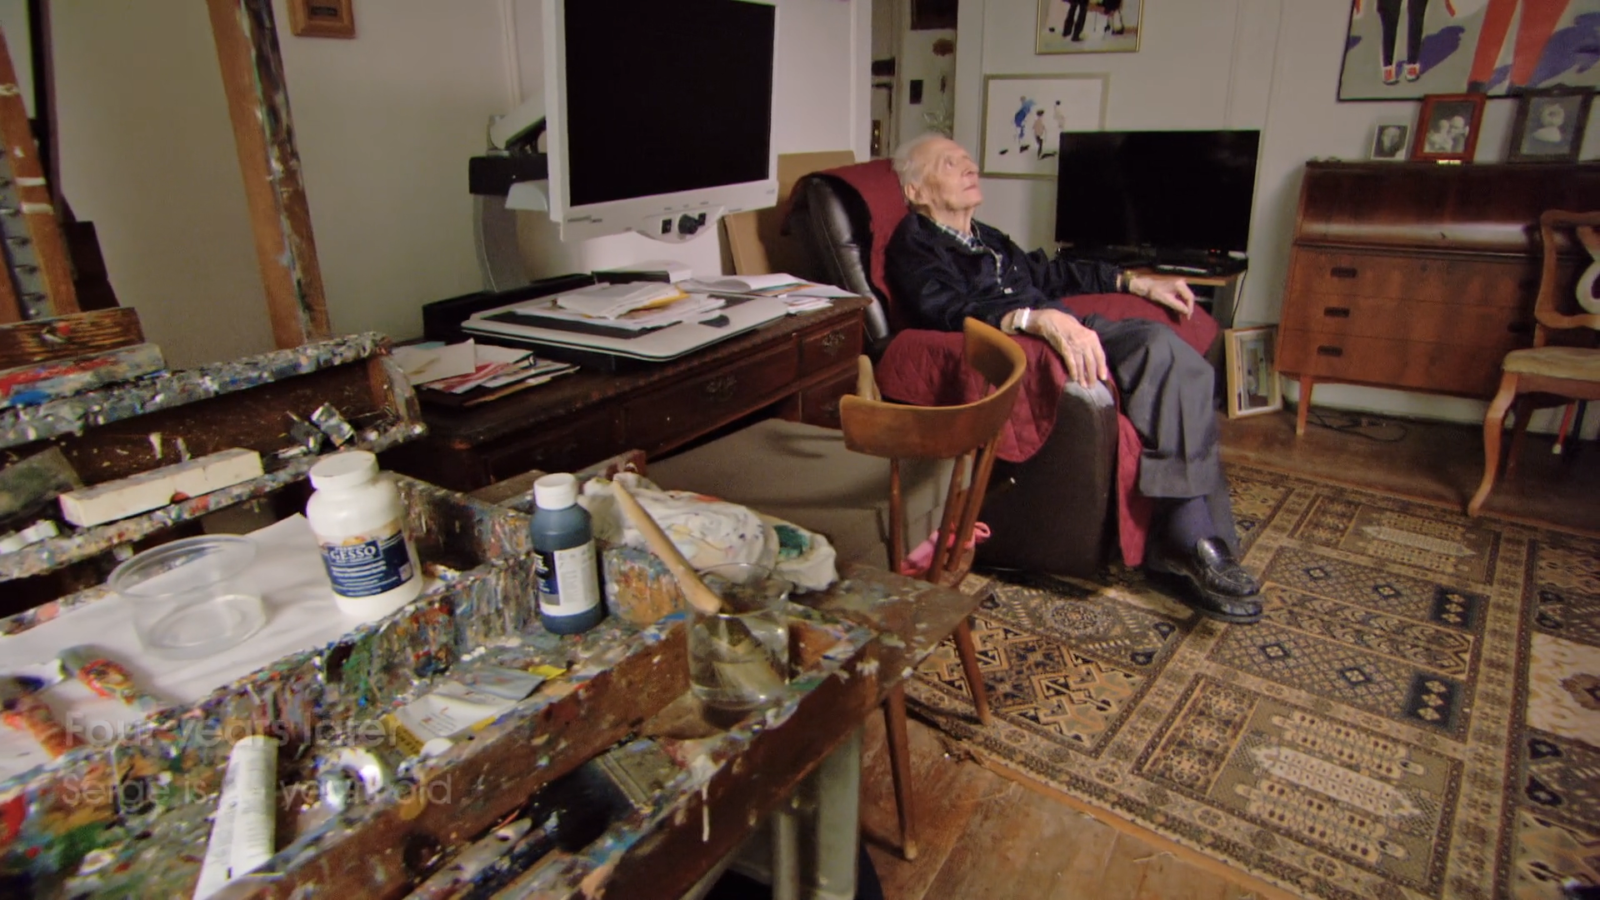 98-year-old artist Serge Hollerbach rests in a recliner in his studio. He is looking up. His palette and easel are in the foreground, crusted with paint from decades of use. There's a desk with a screen reader off to the side and a patterned carpet on the scuffed wood floor. Photographs from his childhood rest on a credenza on the far wall, which is hung with many of Hollerbach's more abstract, post-macular paintings.